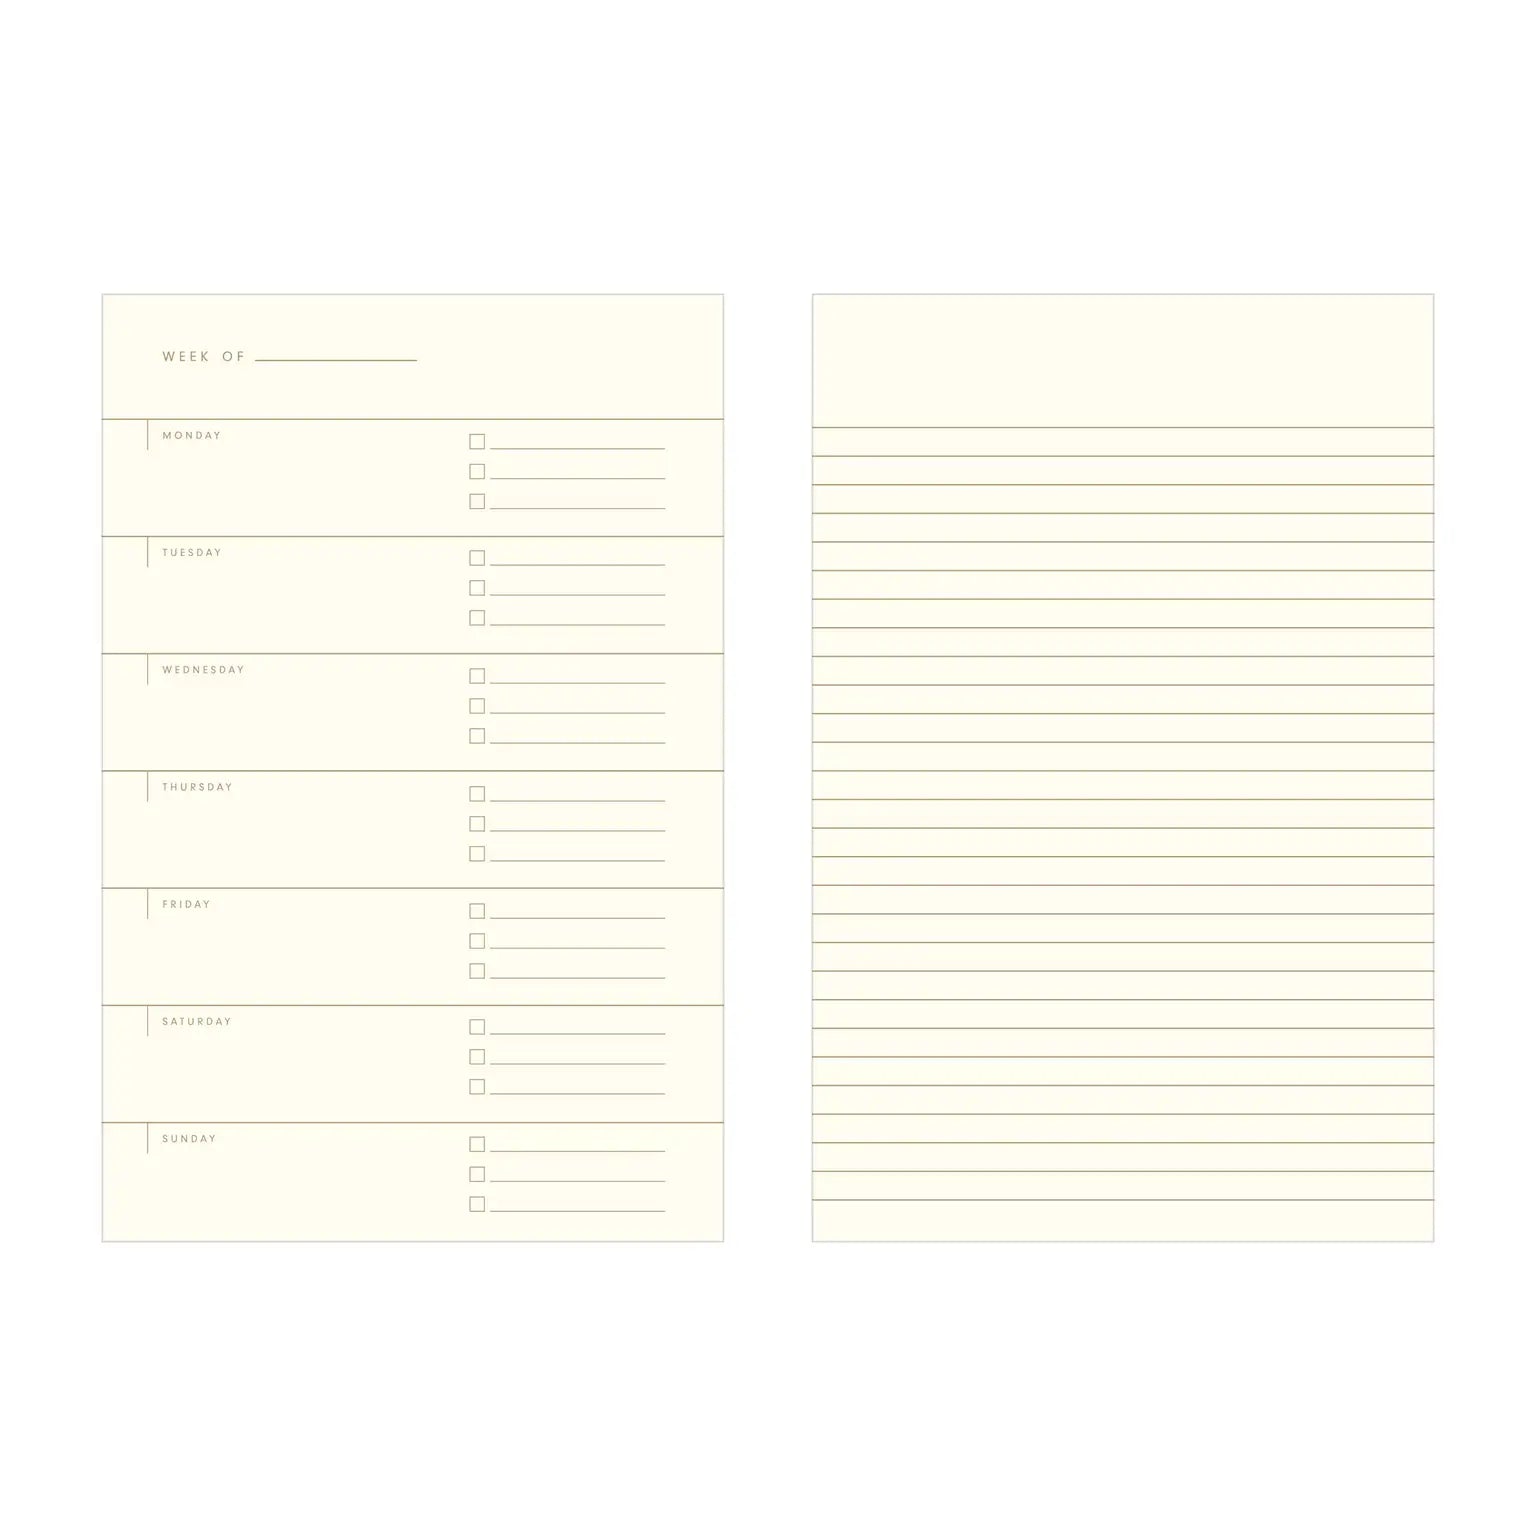 Inside view of the notebook. Left-side pages have days of the week listed with three lines per day. Right-side pages are lined paper.